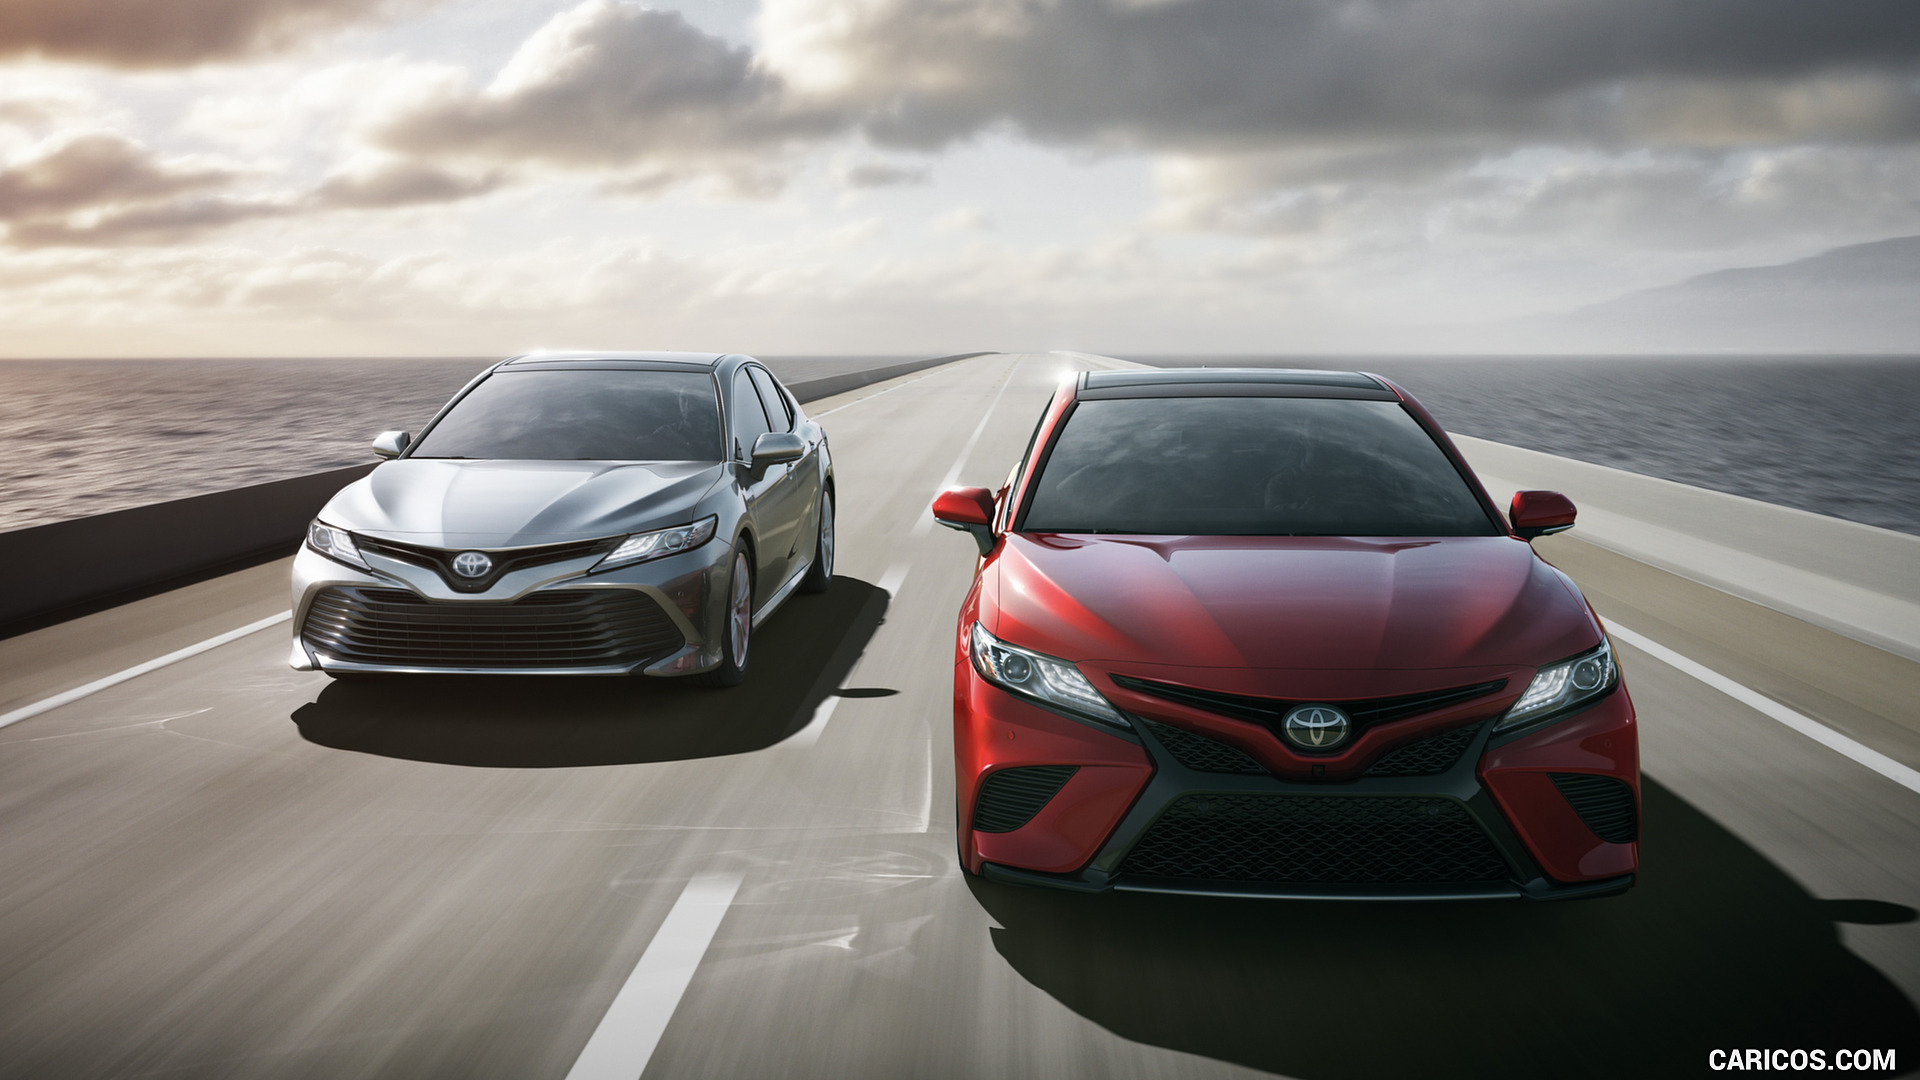 car, Toyota, Vehicle, Road, Toyota Camry Wallpaper